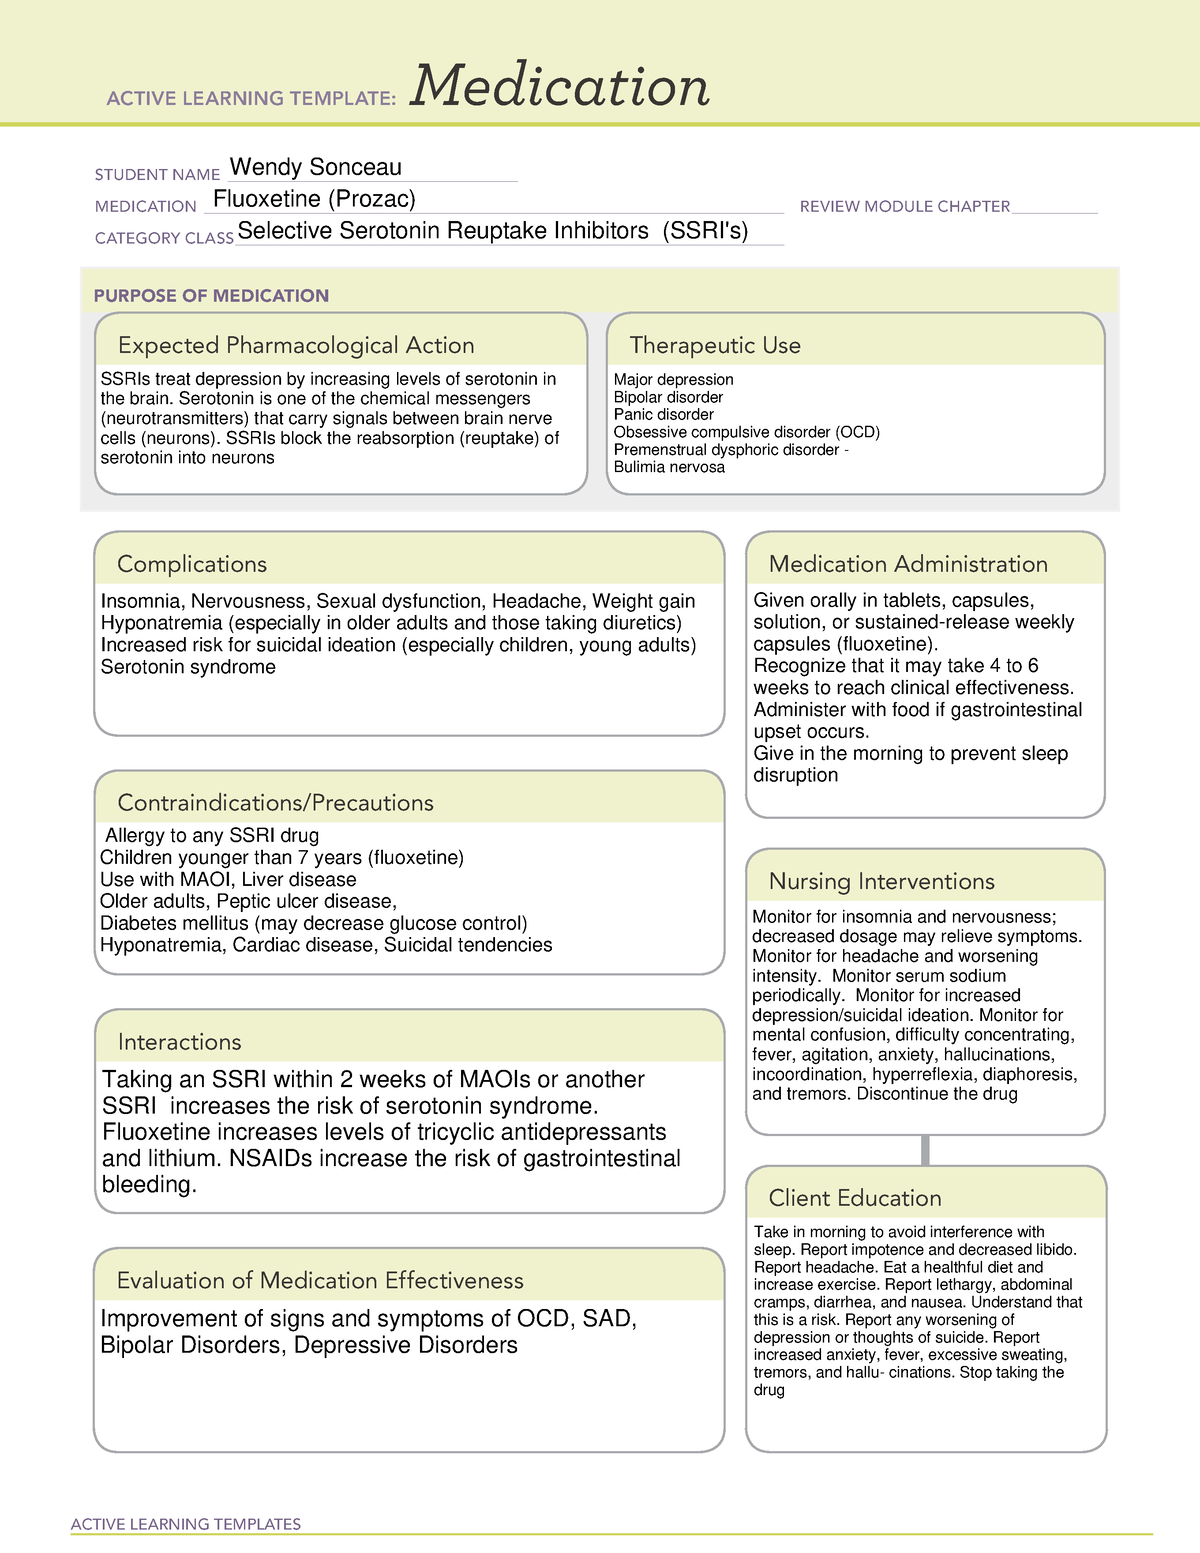 Fluoxetine (Prozac) Drug Card ACTIVE LEARNING TEMPLATES Medication